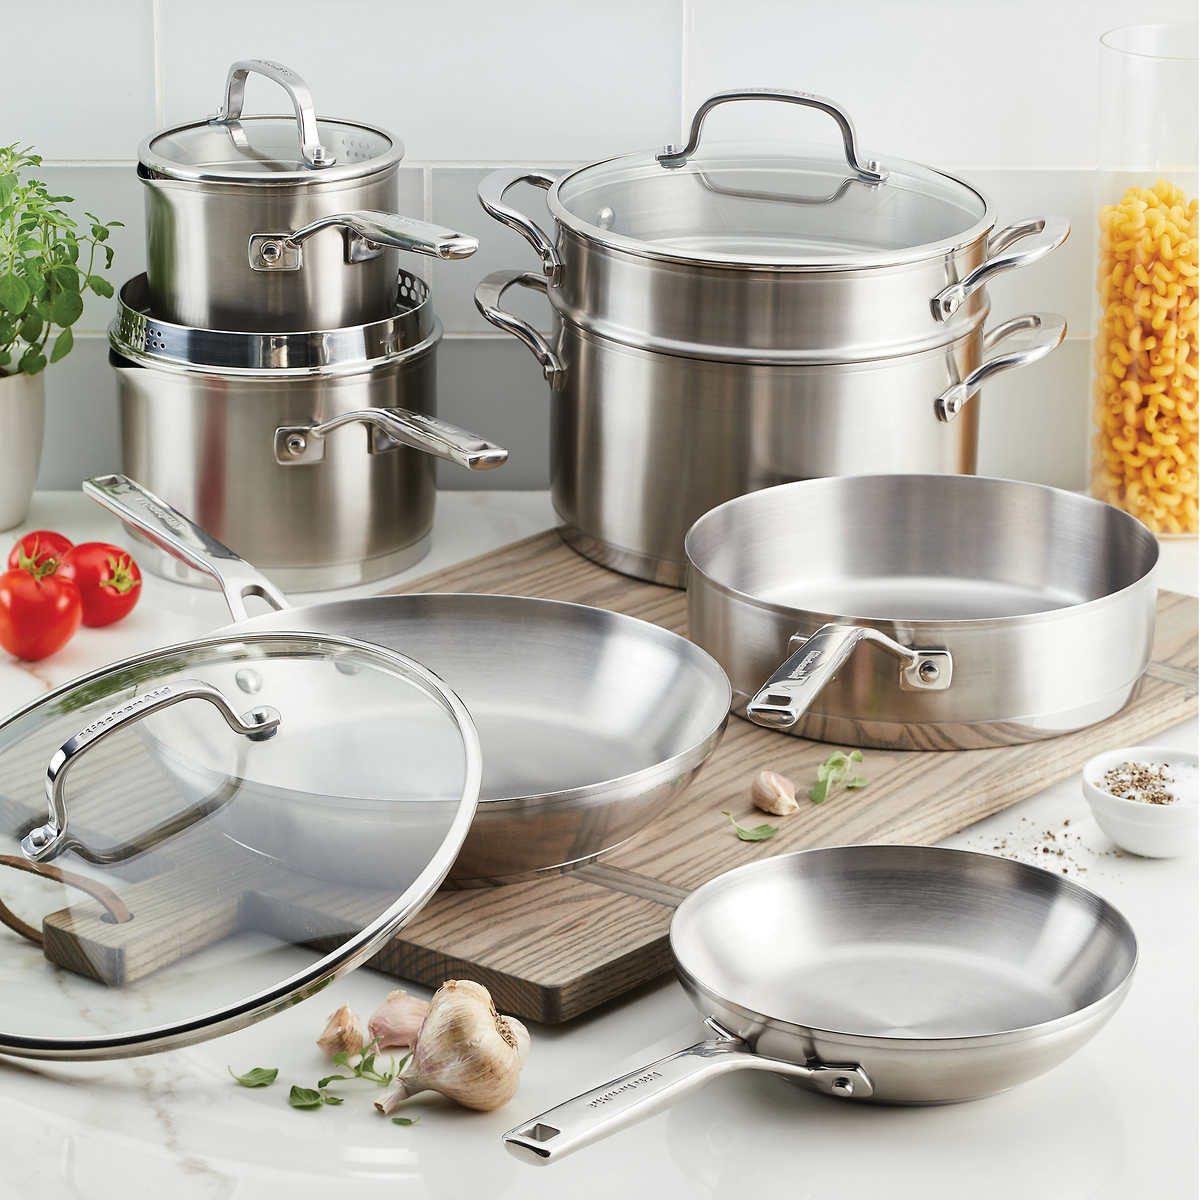 fællesskab volleyball taxa KitchenAid 11-Piece Tri-Ply Stainless Steel Cookware Set | Costco